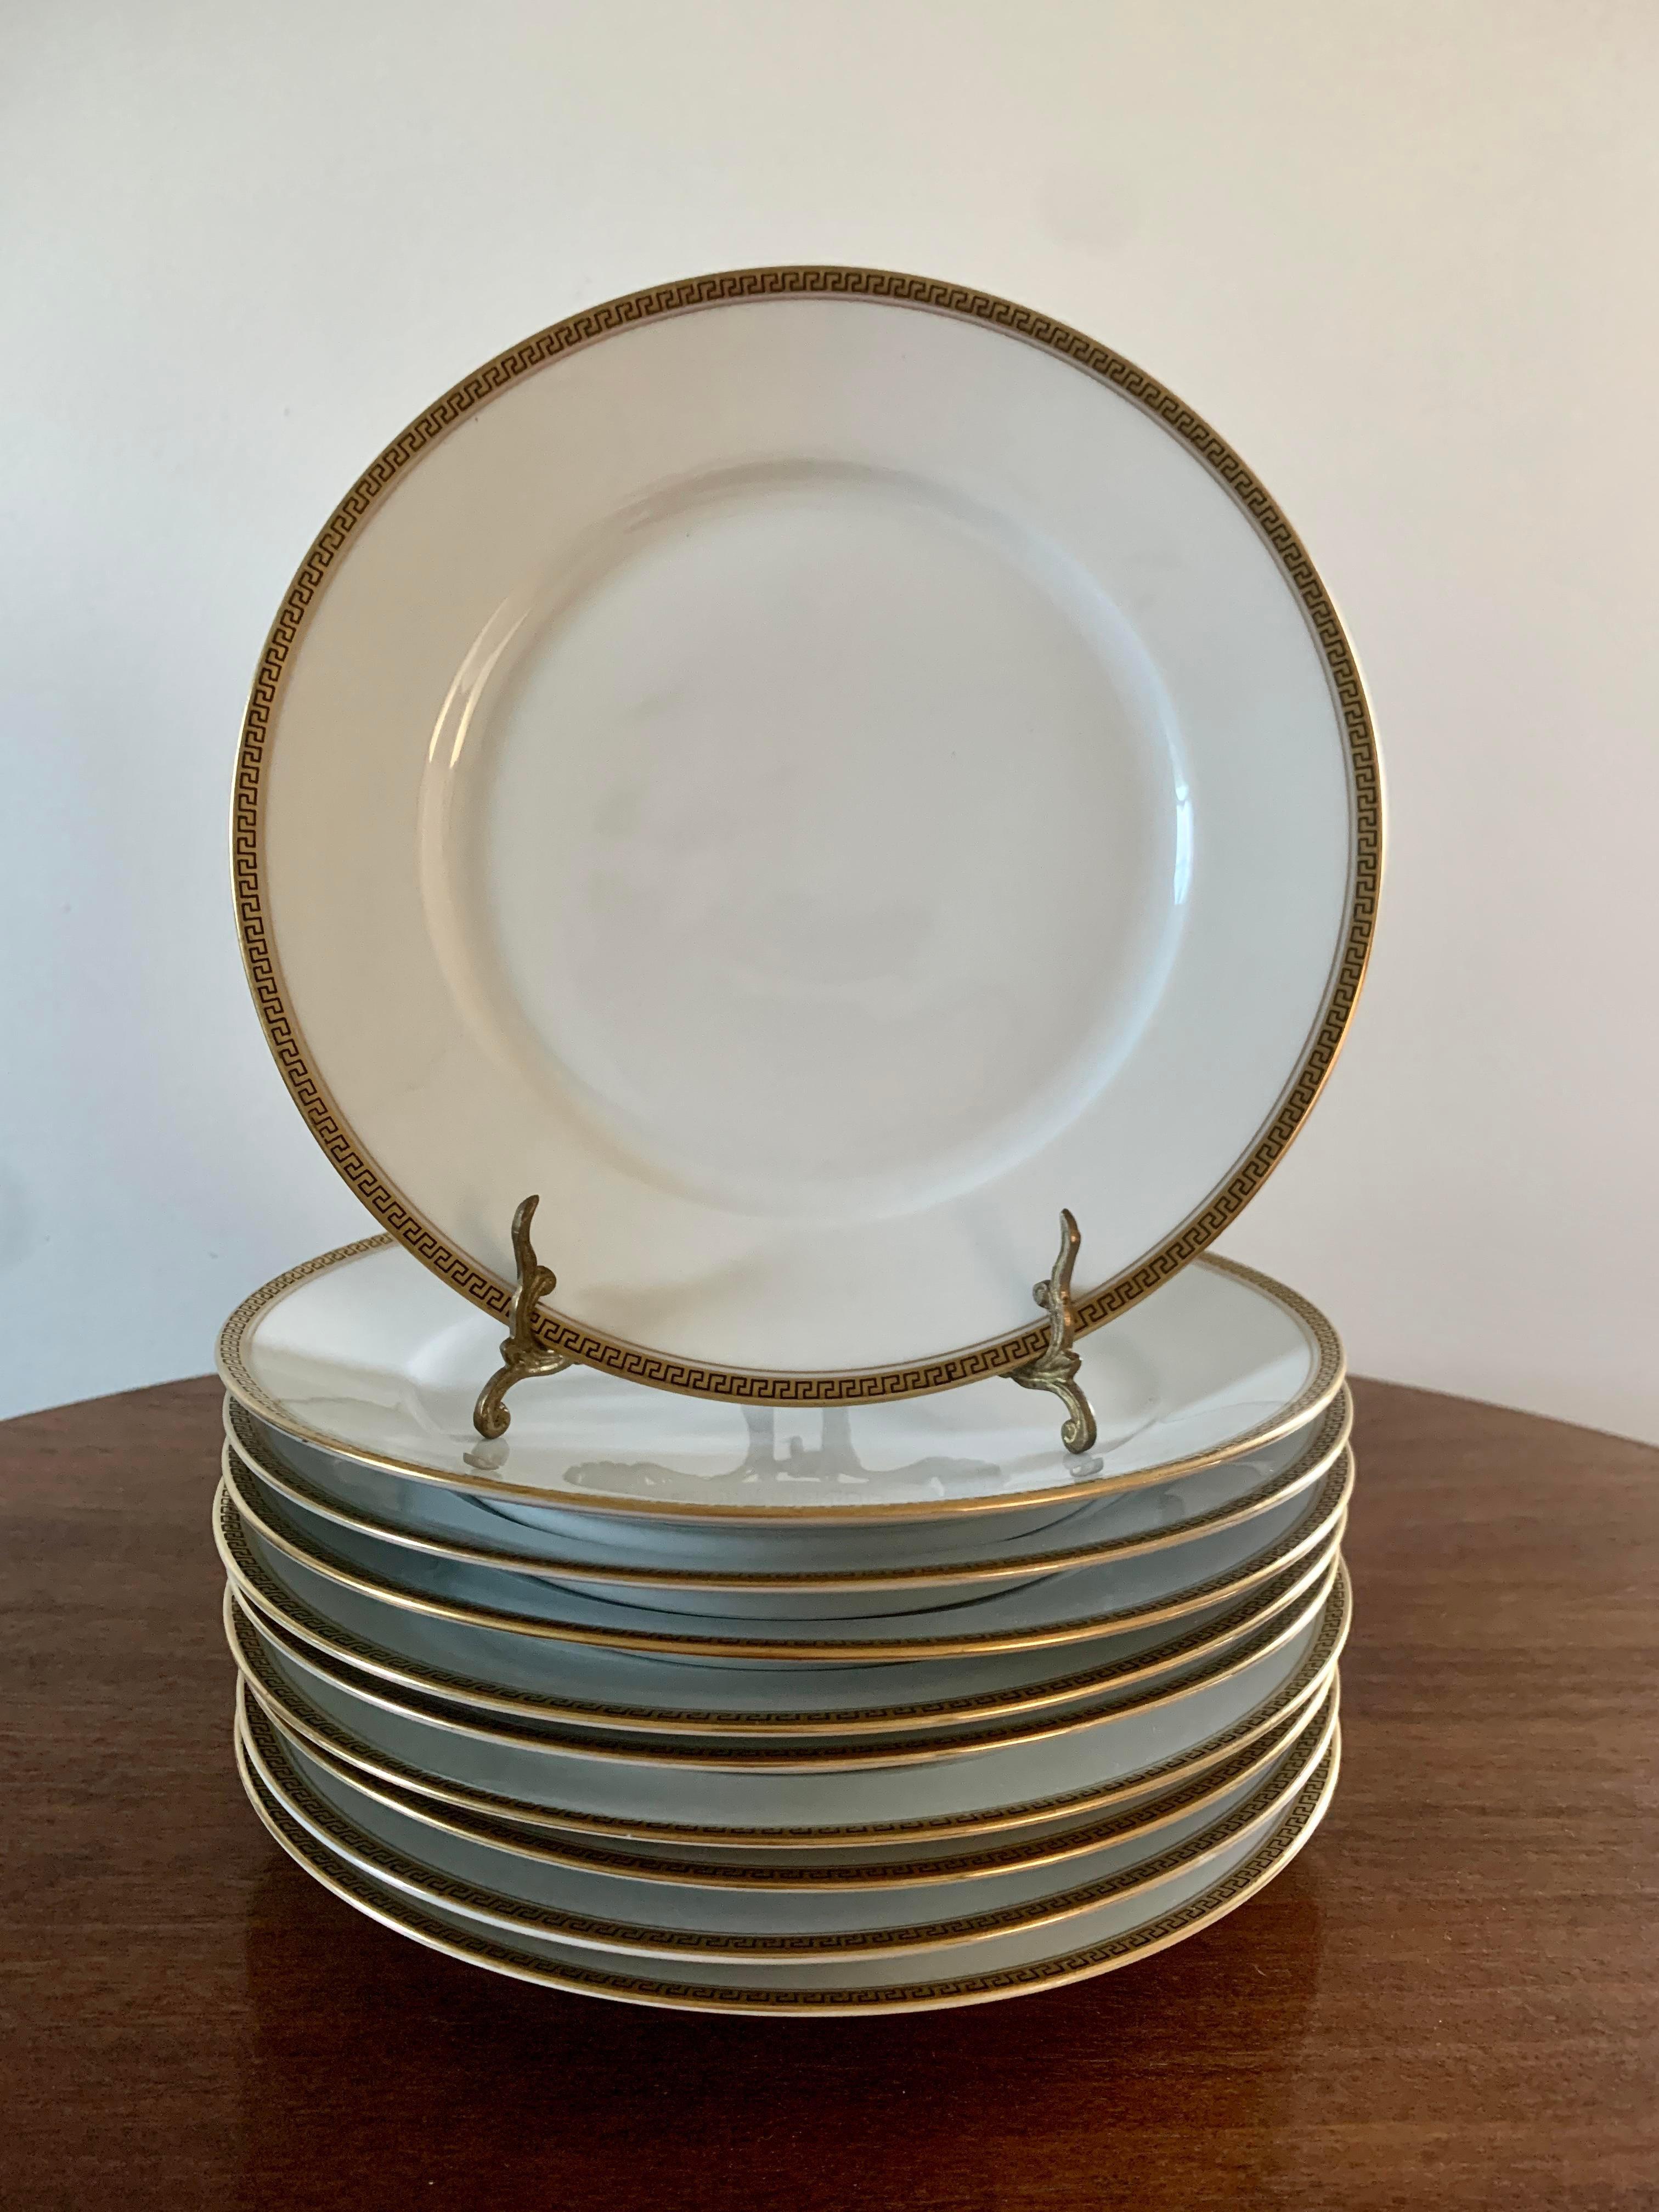 Antique German Greek Key Rimmed Luncheon Plates by Kpm, 1920s For Sale 1